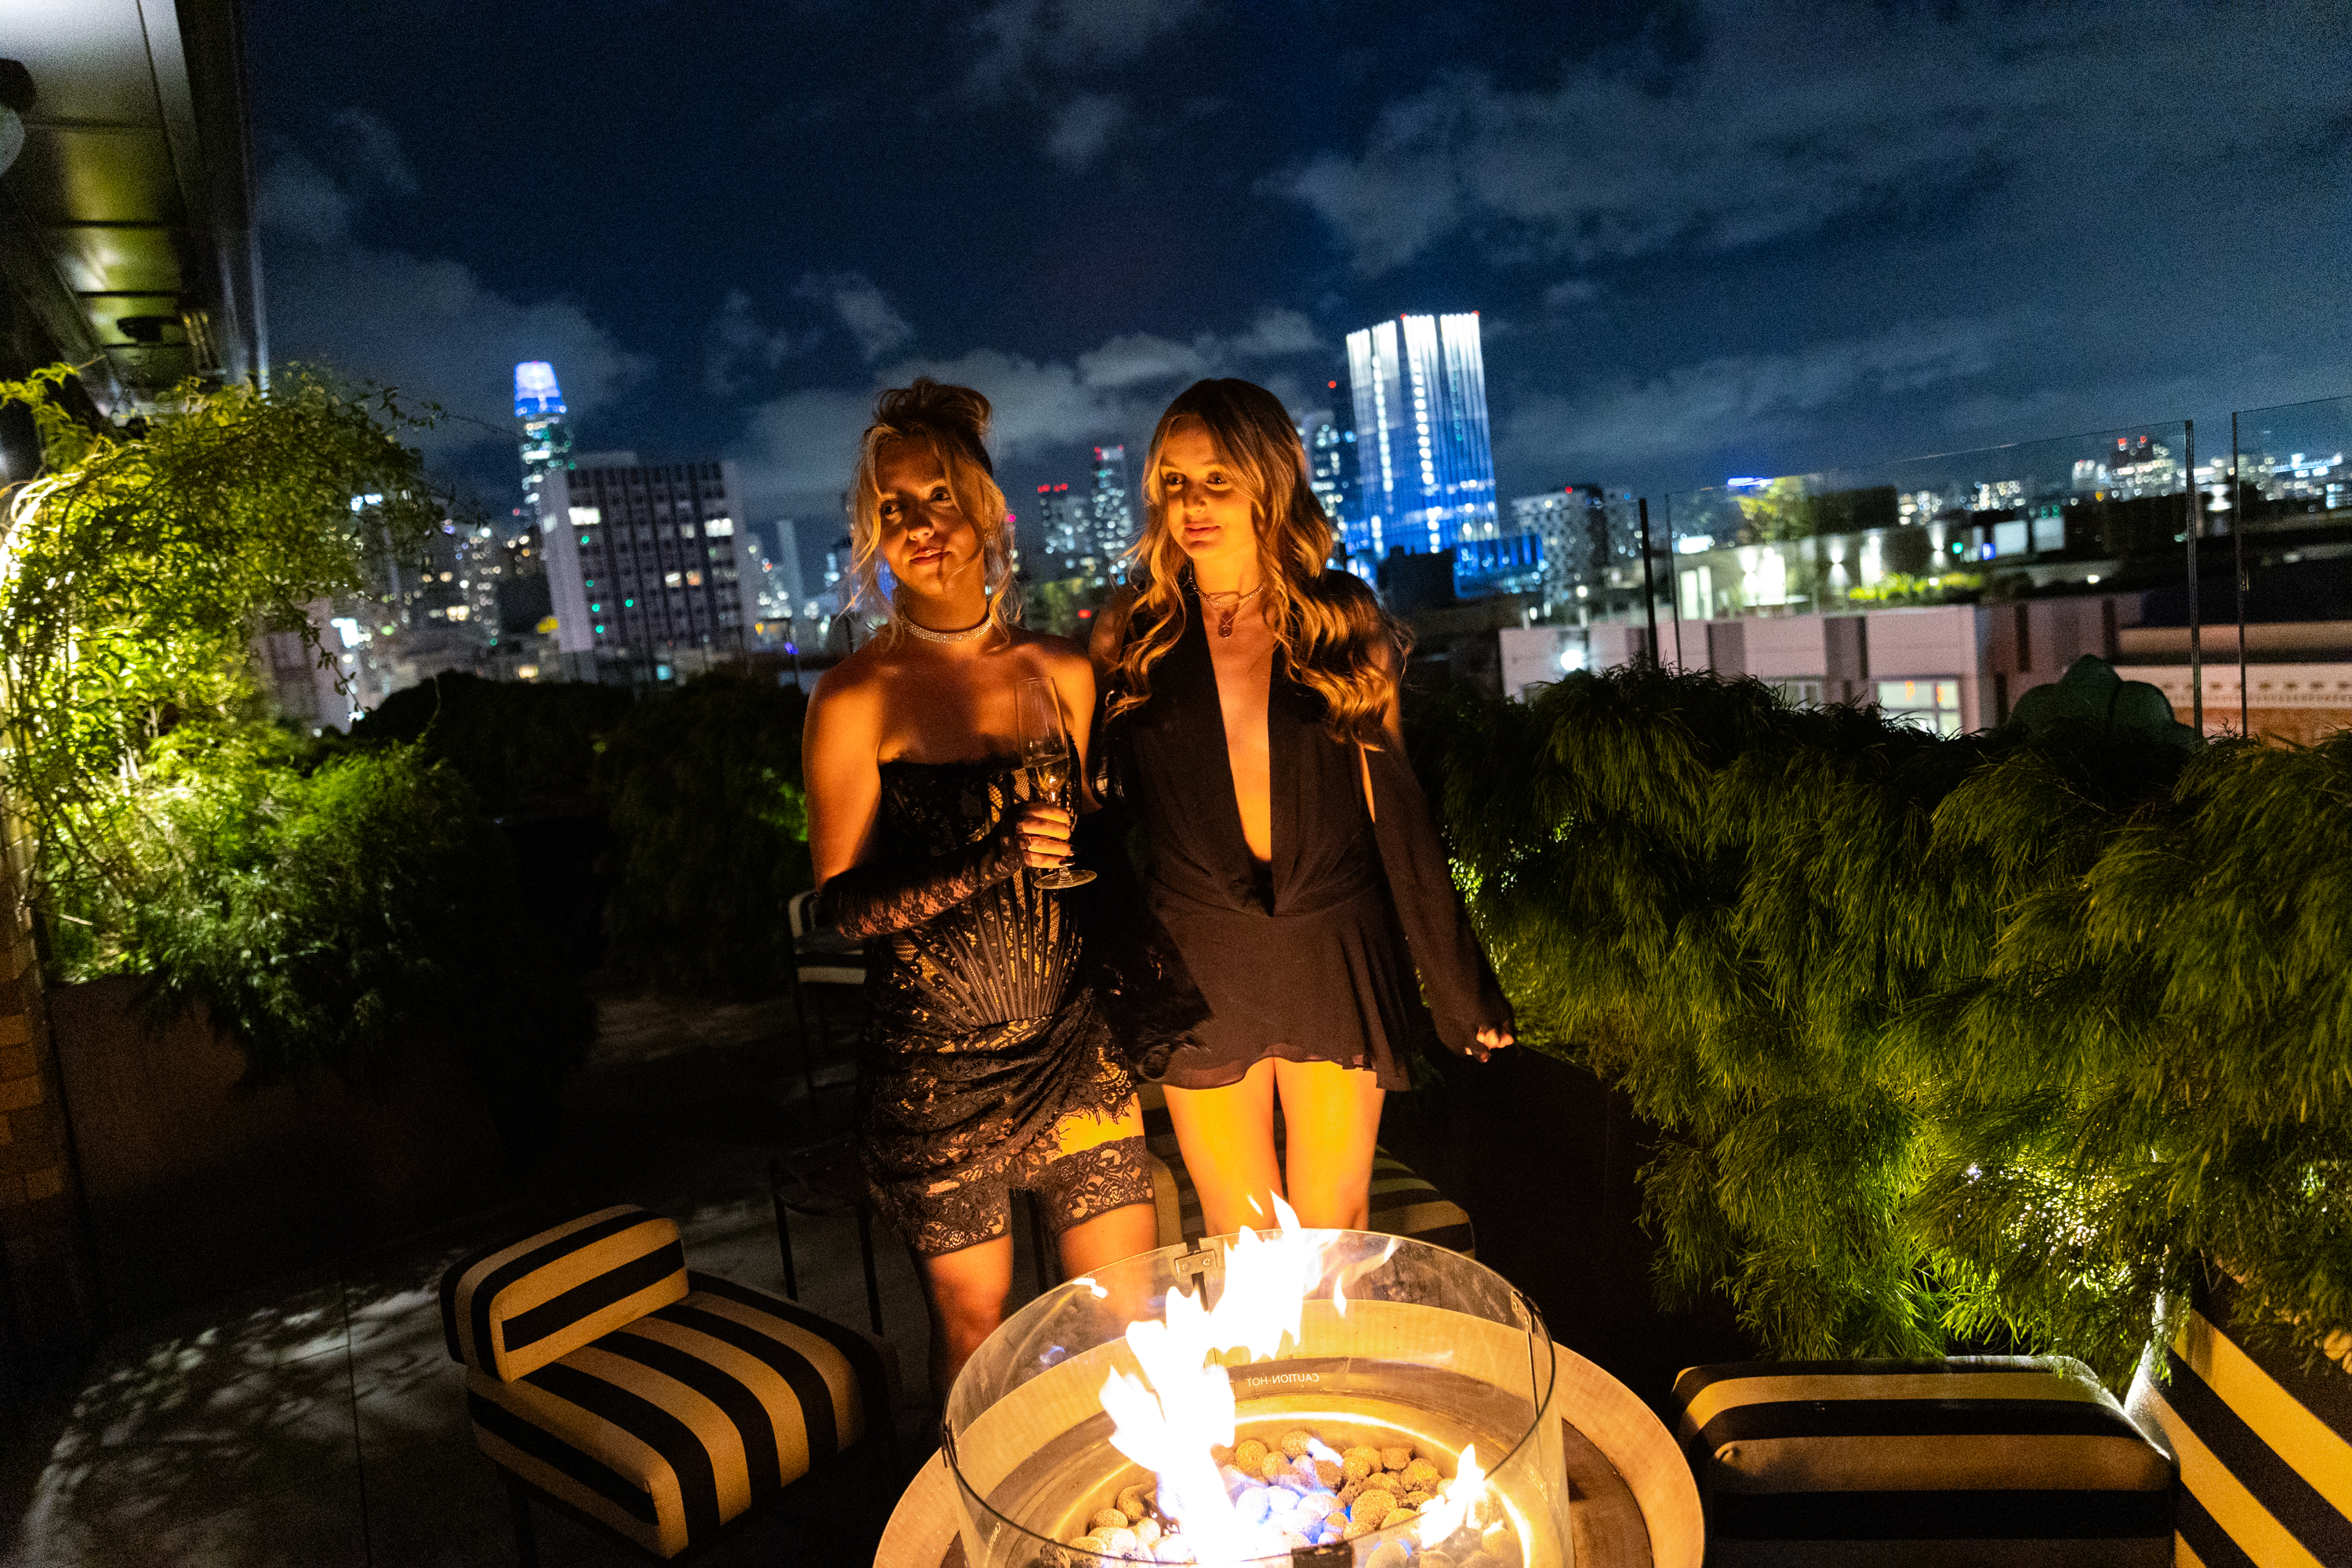 Two people stand by a fire pit on a rooftop at night with city lights in the background.